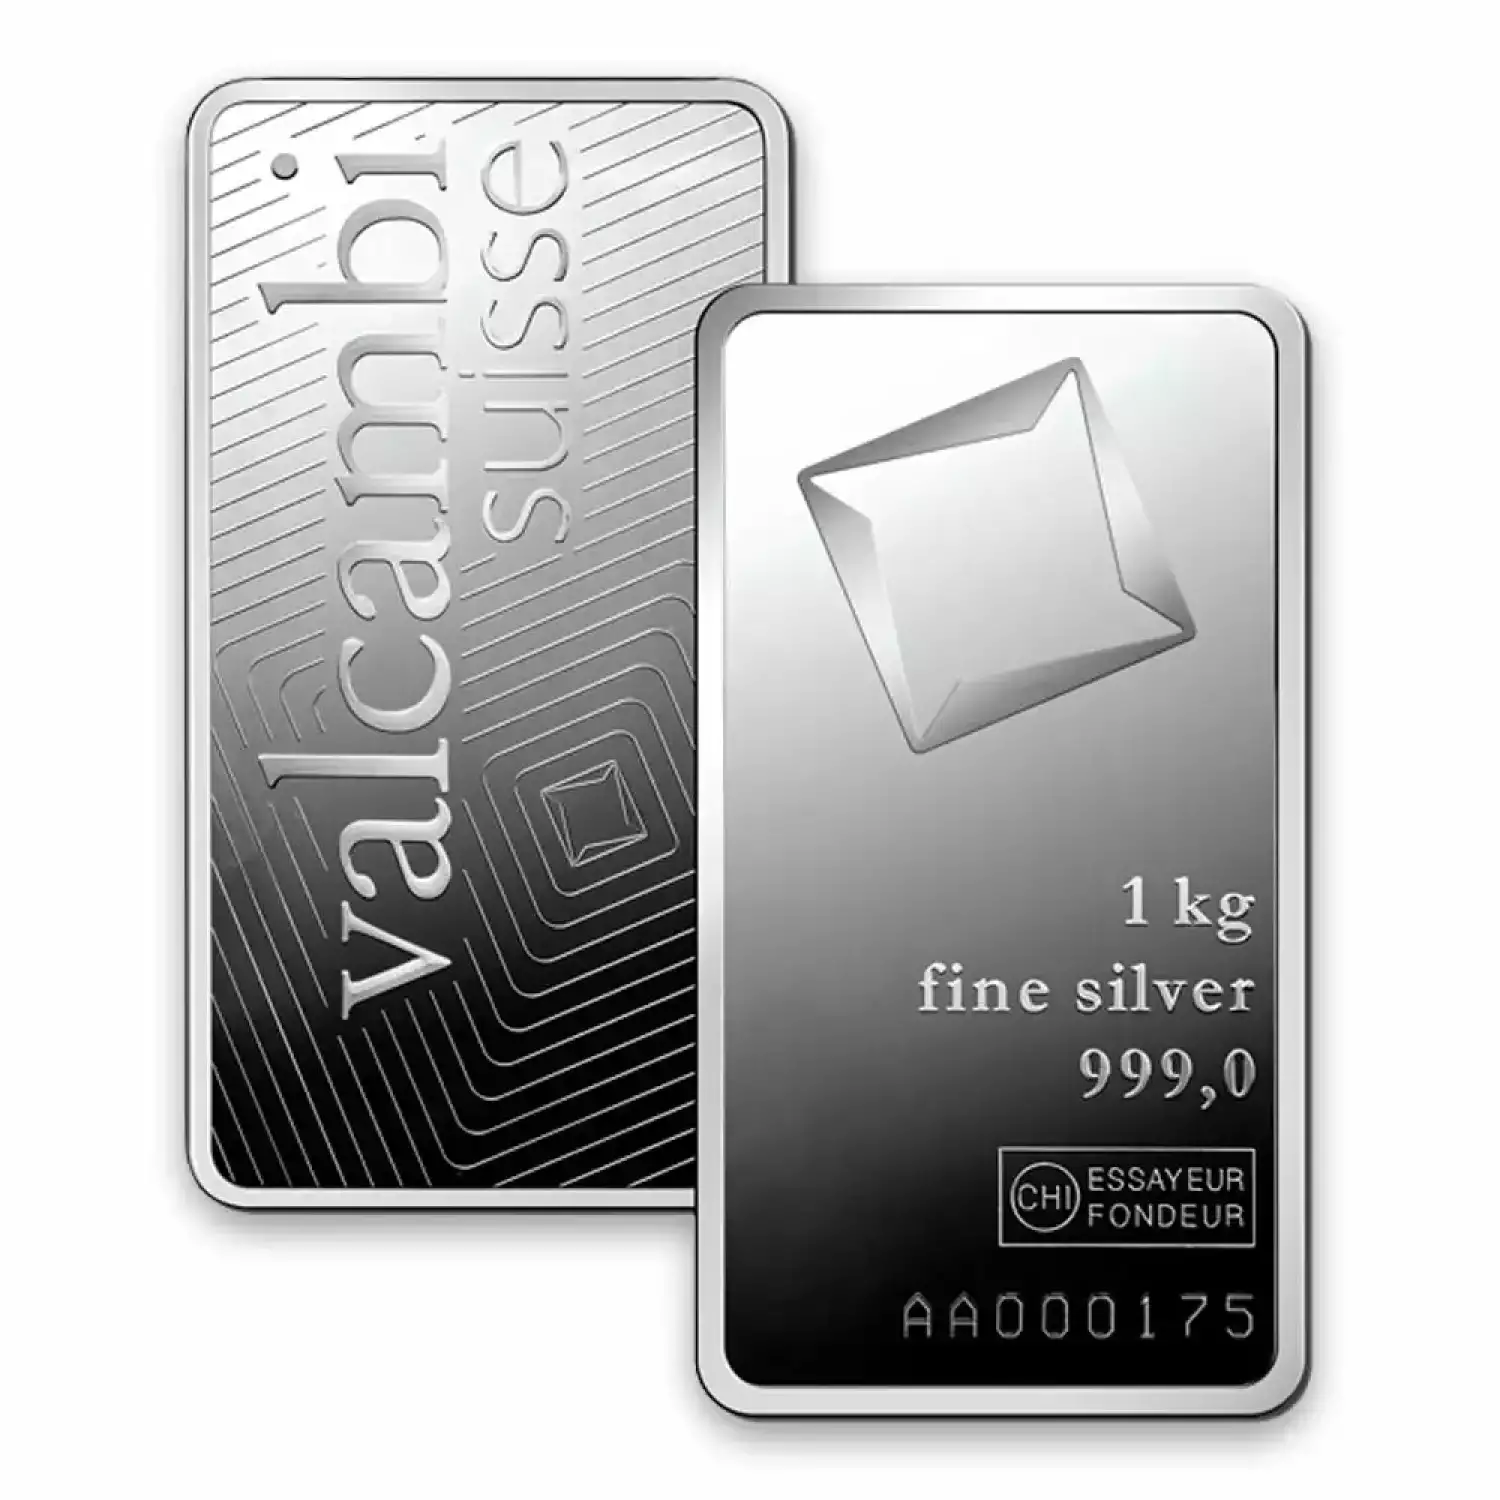 1kg Valcambi Minted Silver Bar (2)